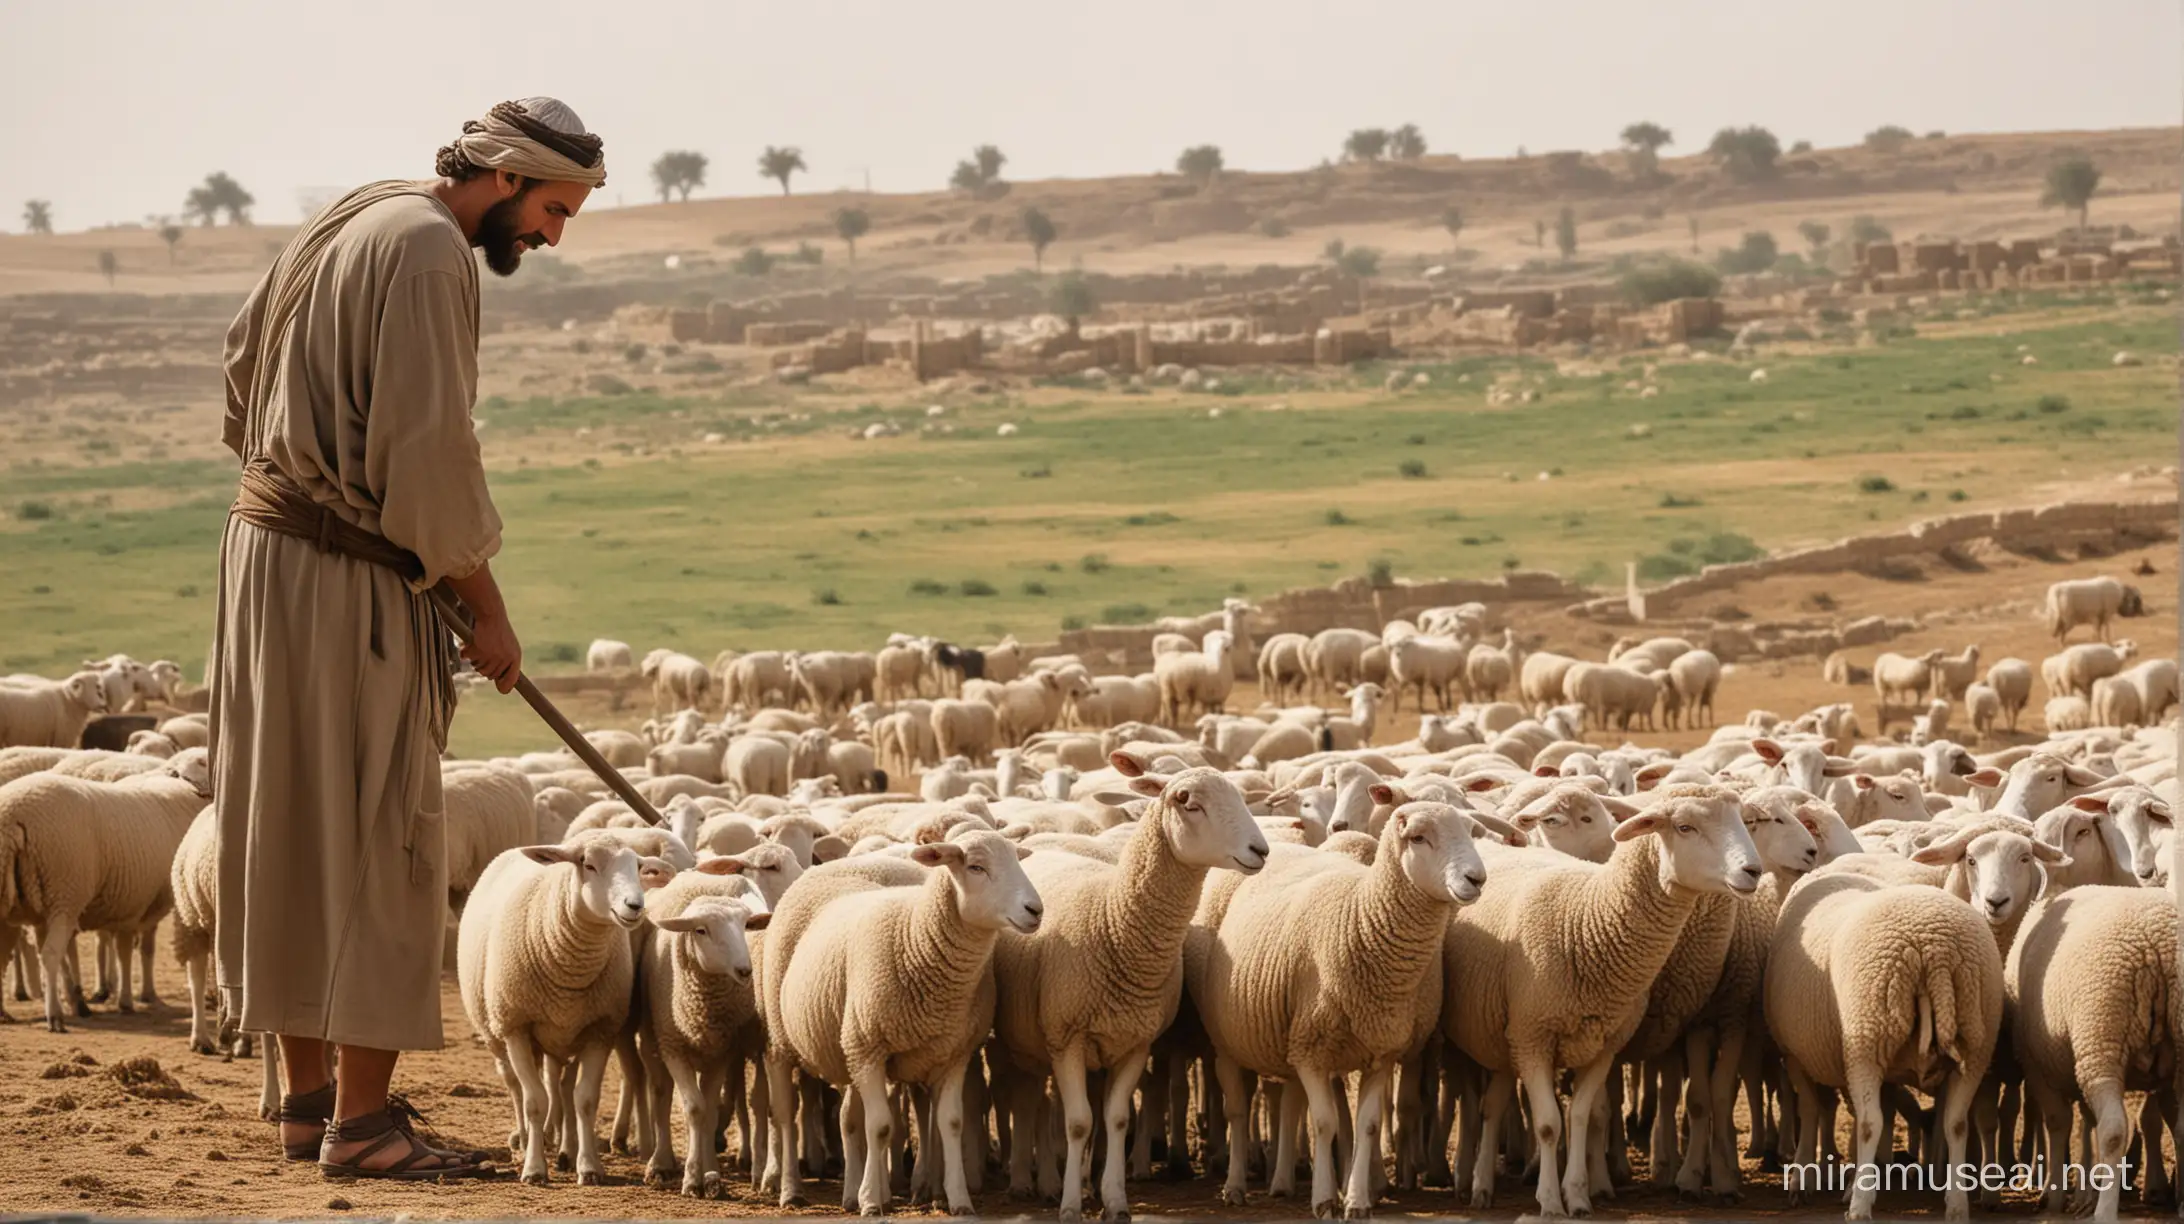 a man tending sheep on a farm in the middle east during the era of Moses.